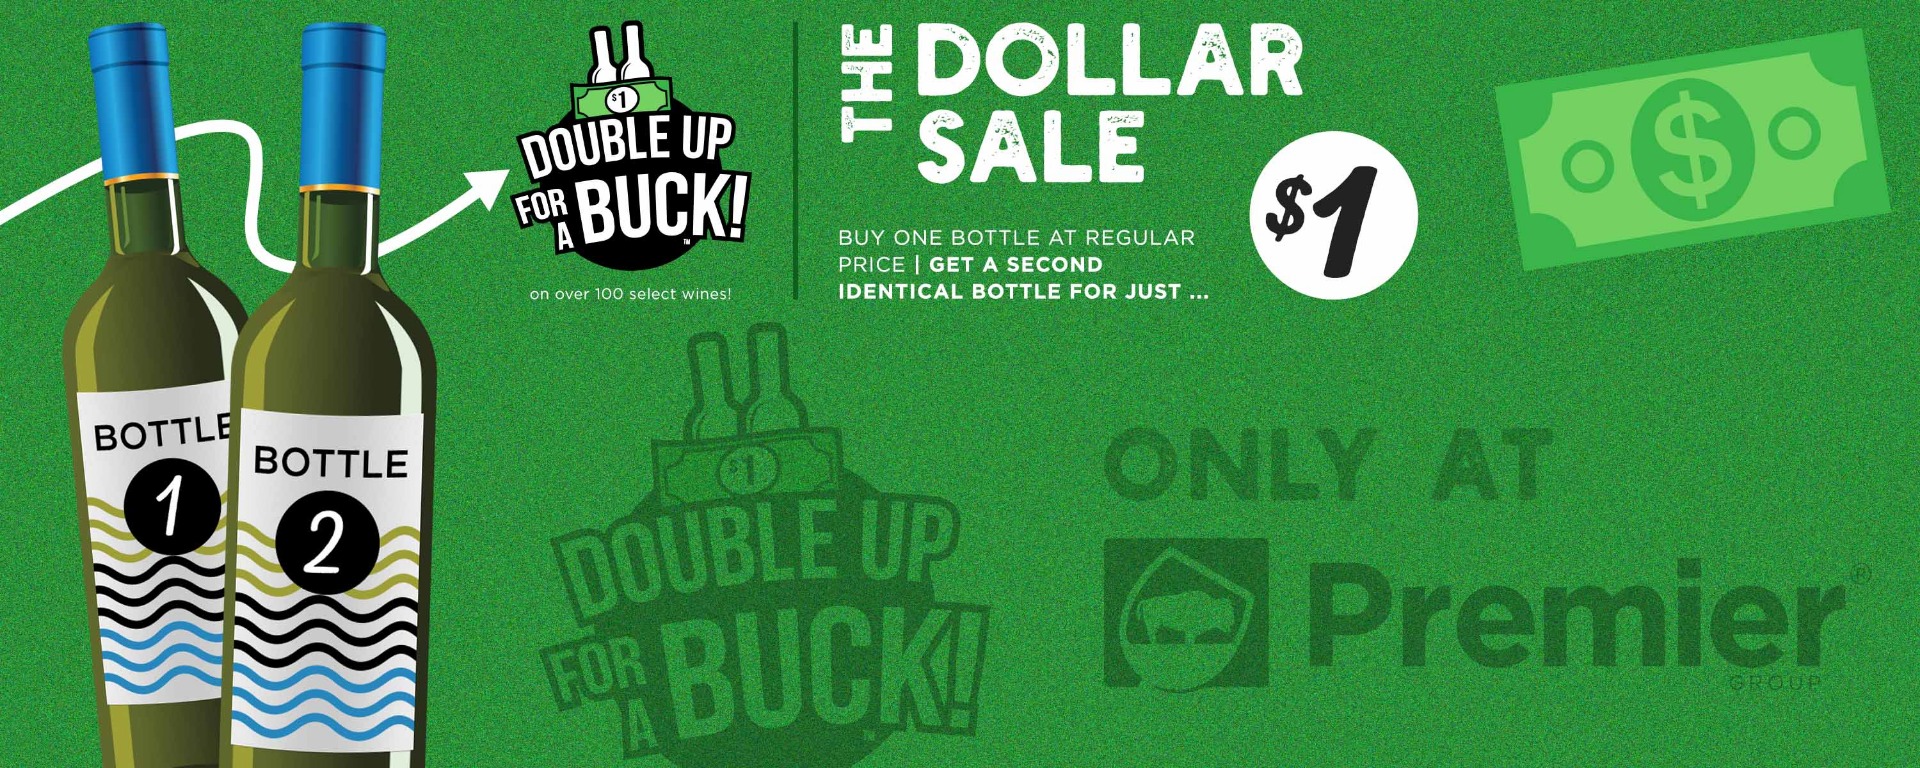 The Dollar Sale and Double Up for a Buck are on now!